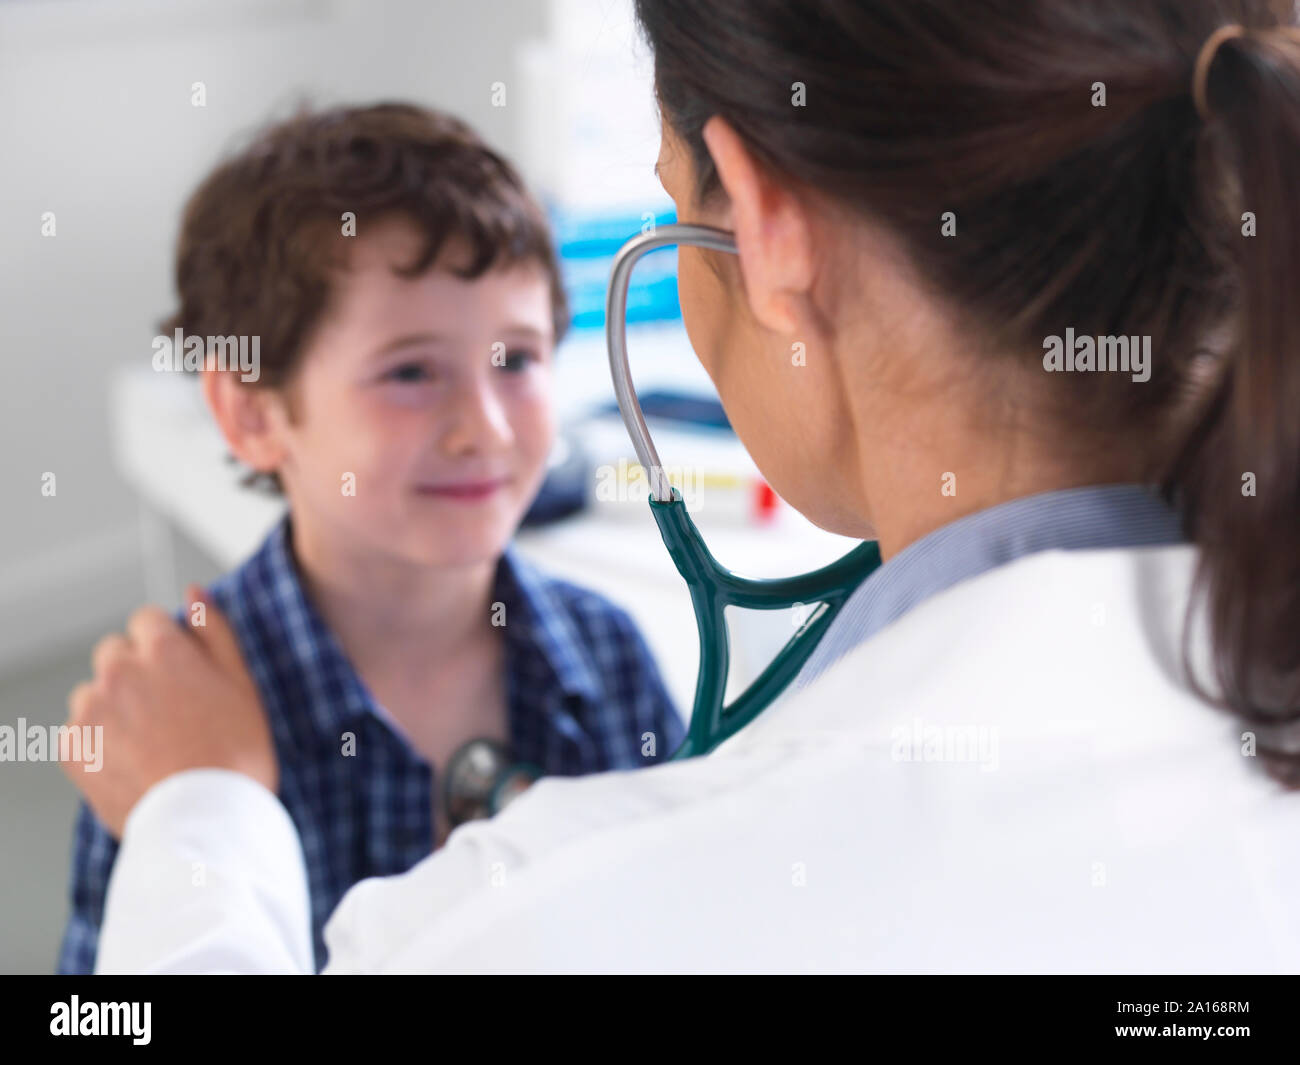 Female doctor examiming a boy in a clinic Stock Photo